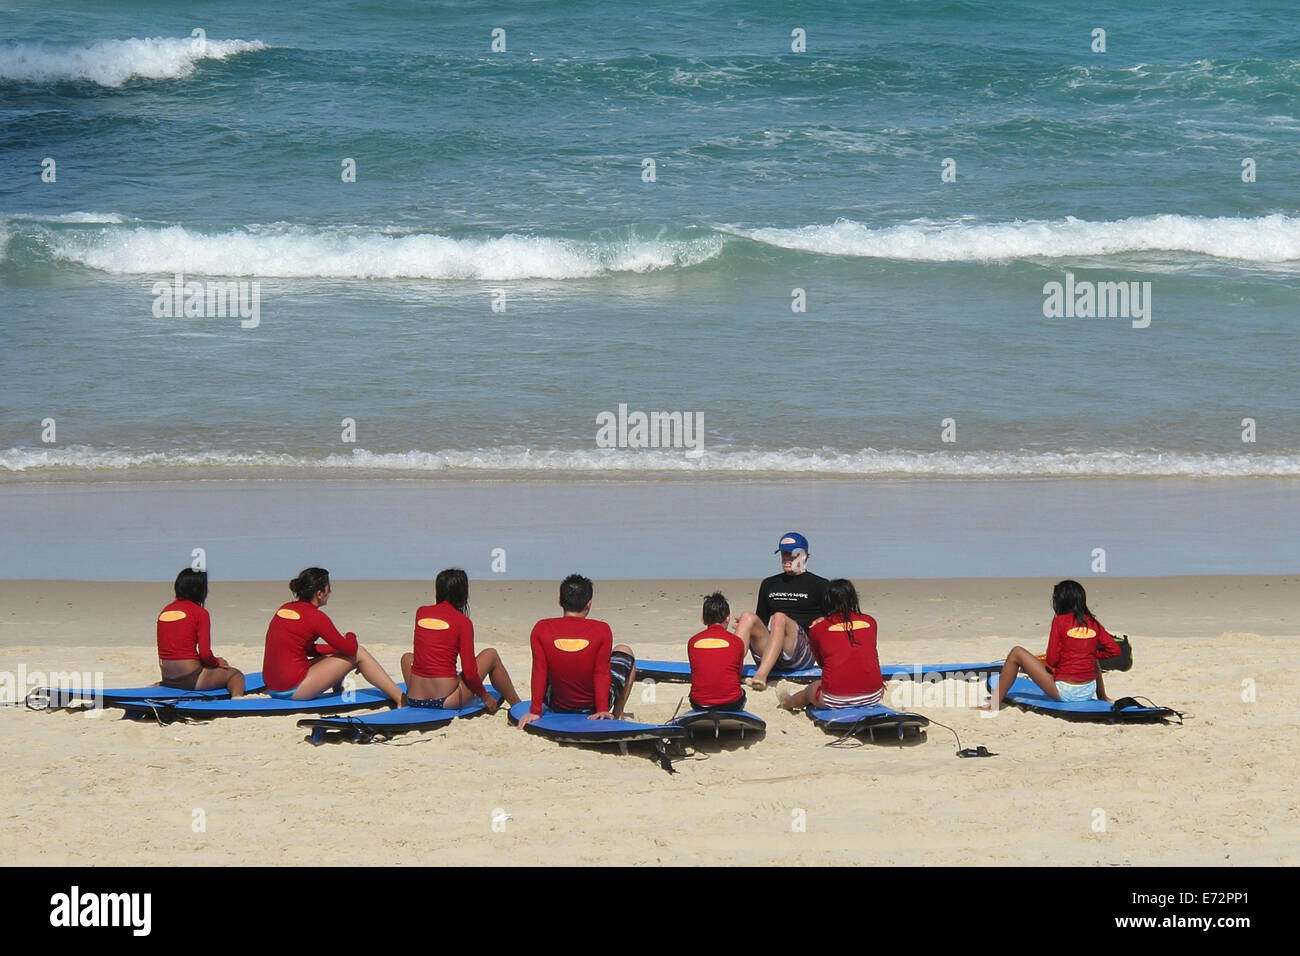 Teenagers having a surf board riding lesson on Surfer's Paradise beach on the Gold Coast in Australia Stock Photo